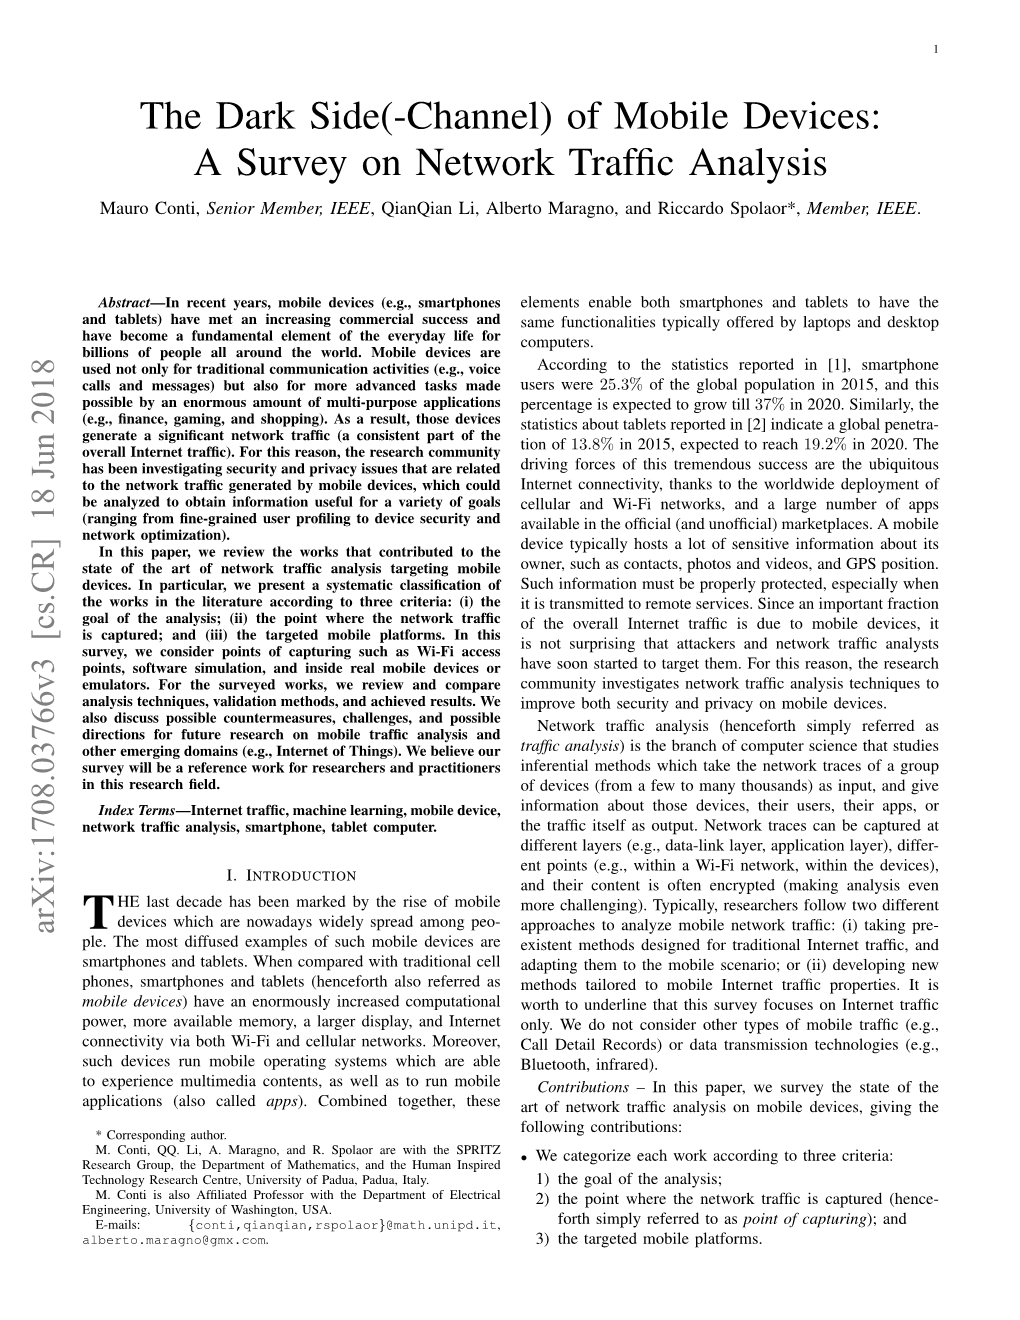 Of Mobile Devices: a Survey on Network Traffic Analysis